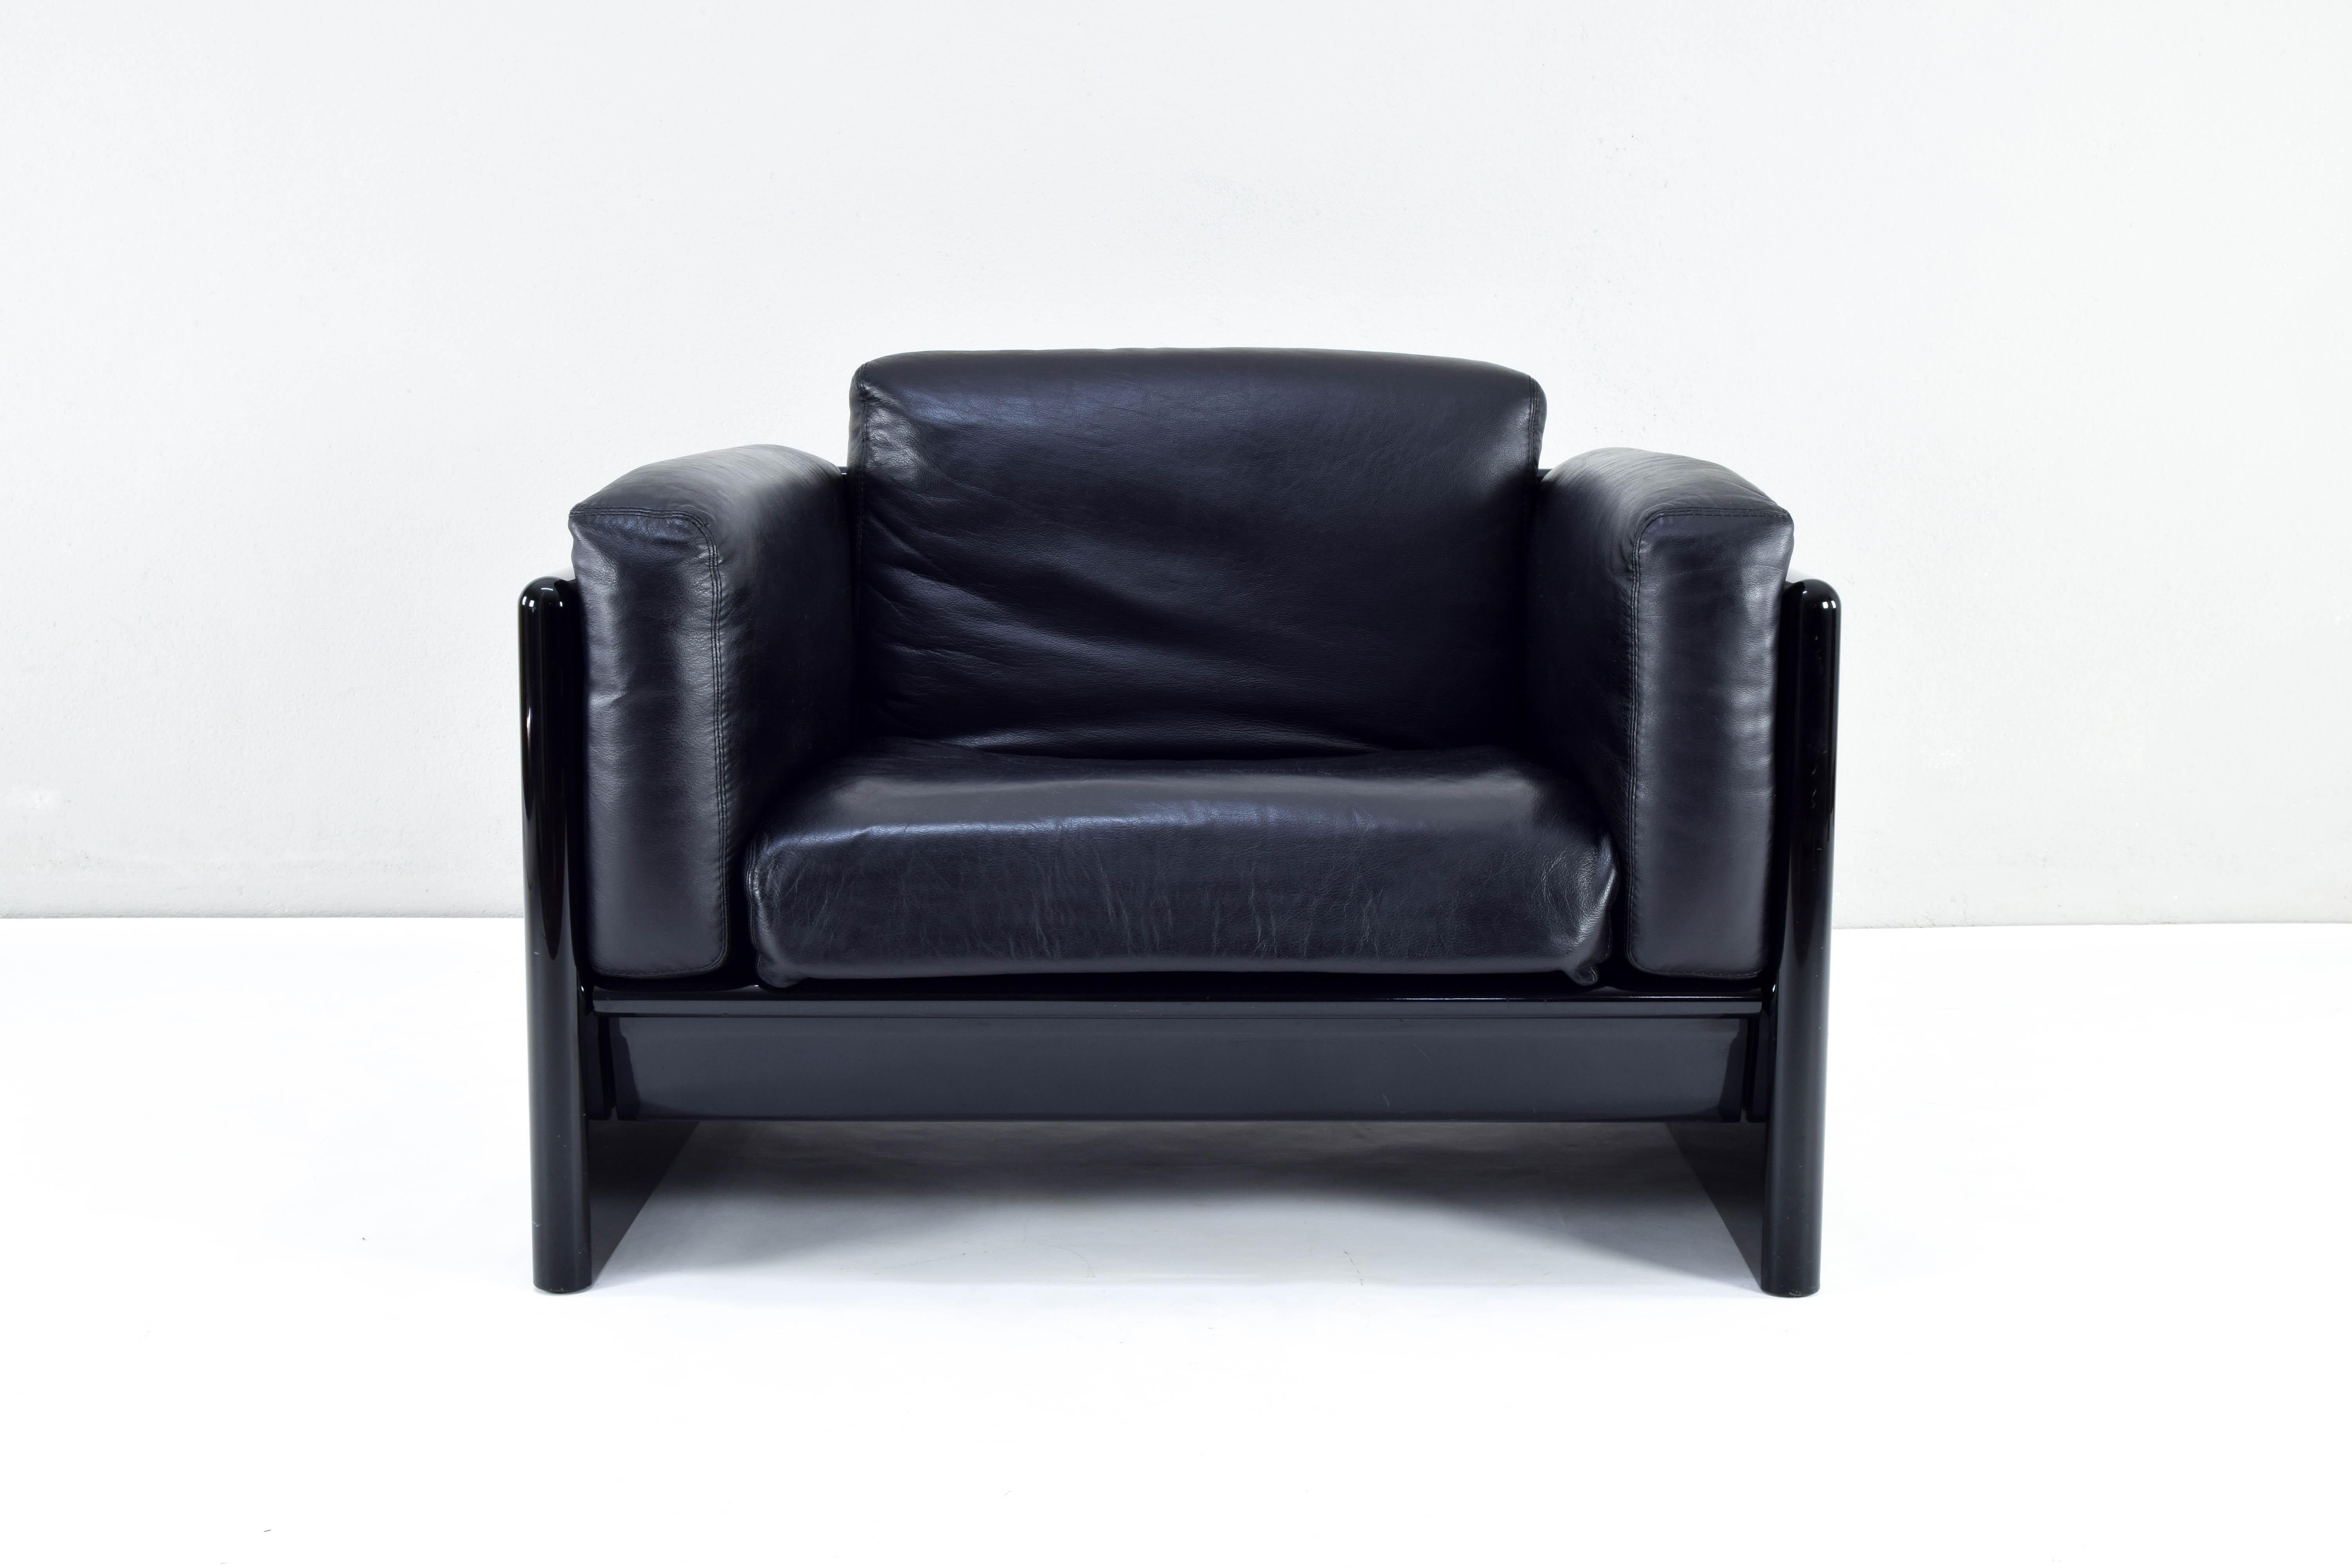 Simone model armchair, designed by Dino Gavina and produced by Studio Simon in Italy in the 70s.
Structure in solid wood lacquered in gloss black.
Black leather upholstery in very good condition, except for a scratch on the seat that, although not